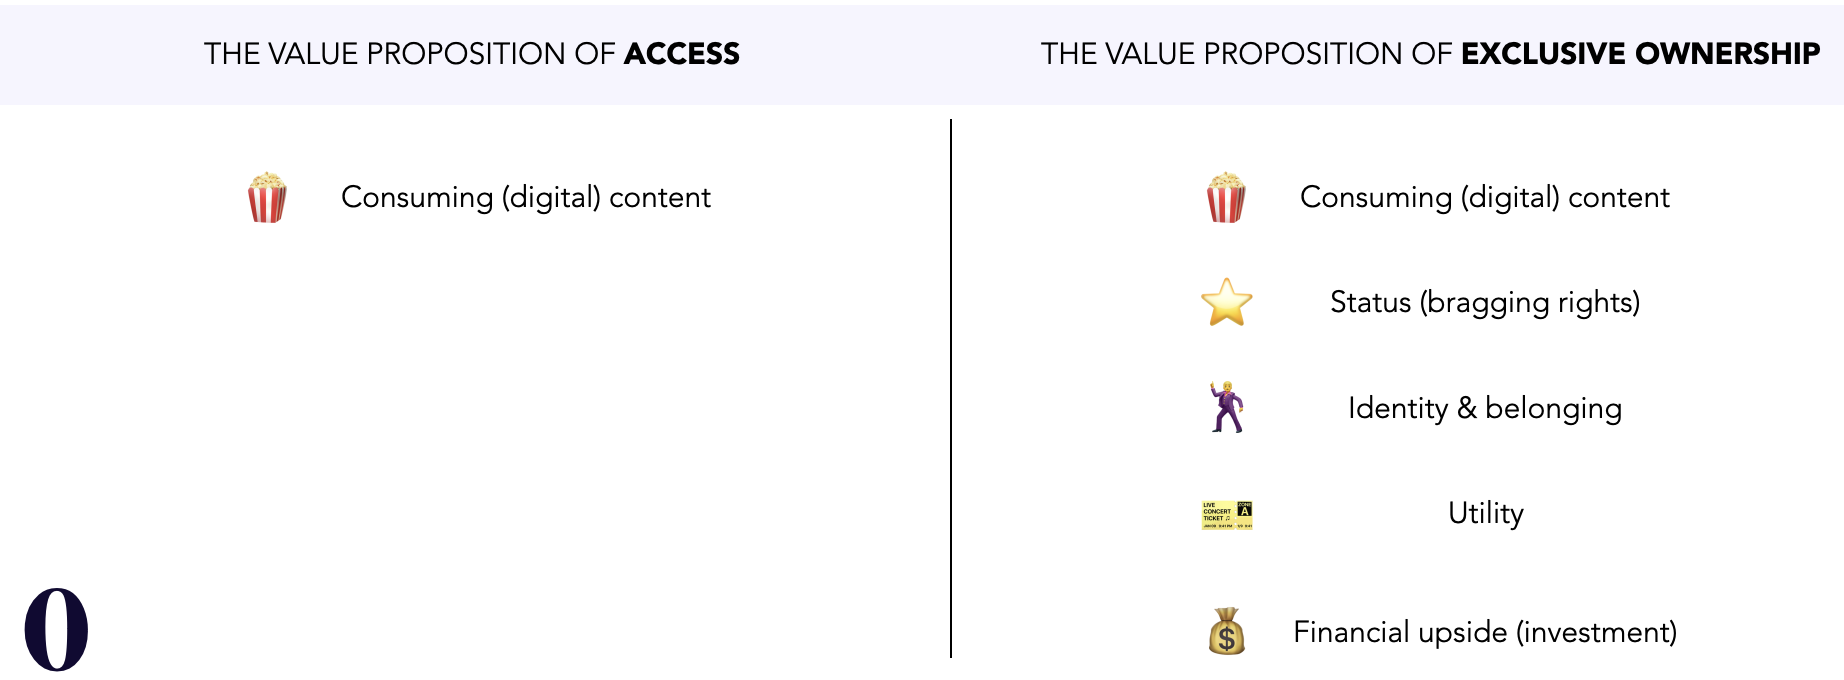 The value proposition of exclusive ownership vs access